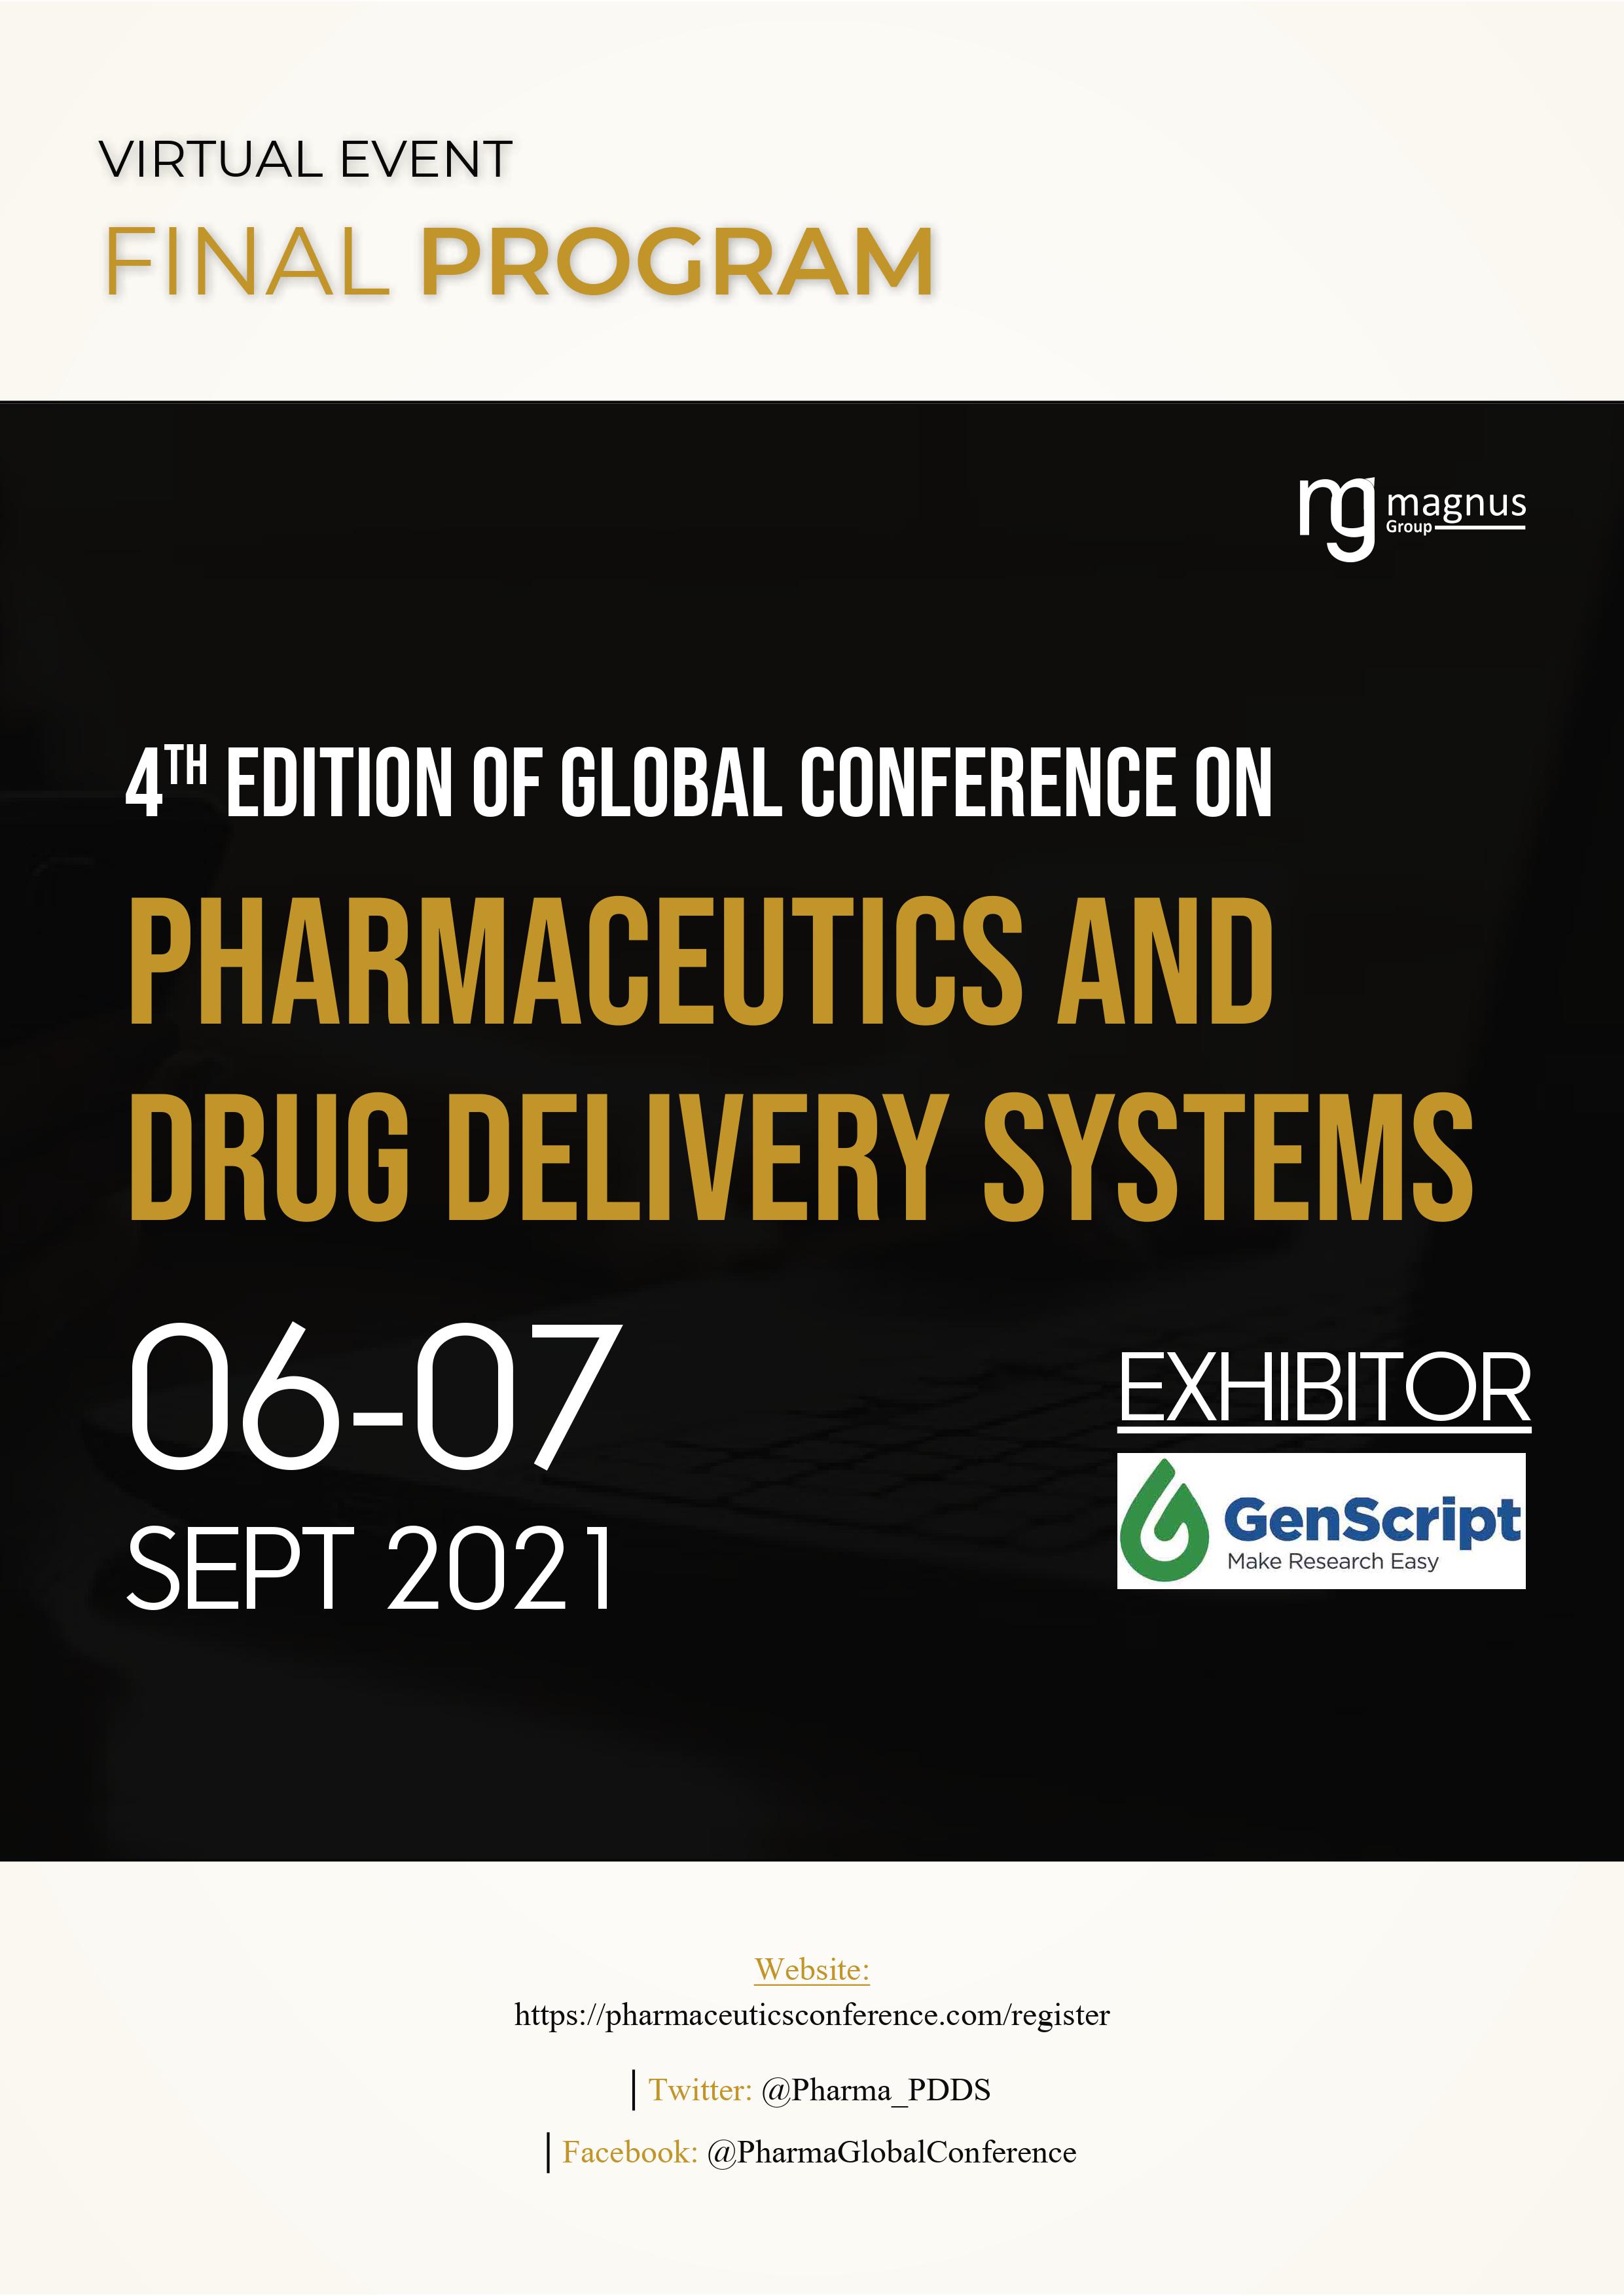 4th Edition of Global Conference on Pharmaceutics and Drug Delivery Systems Program